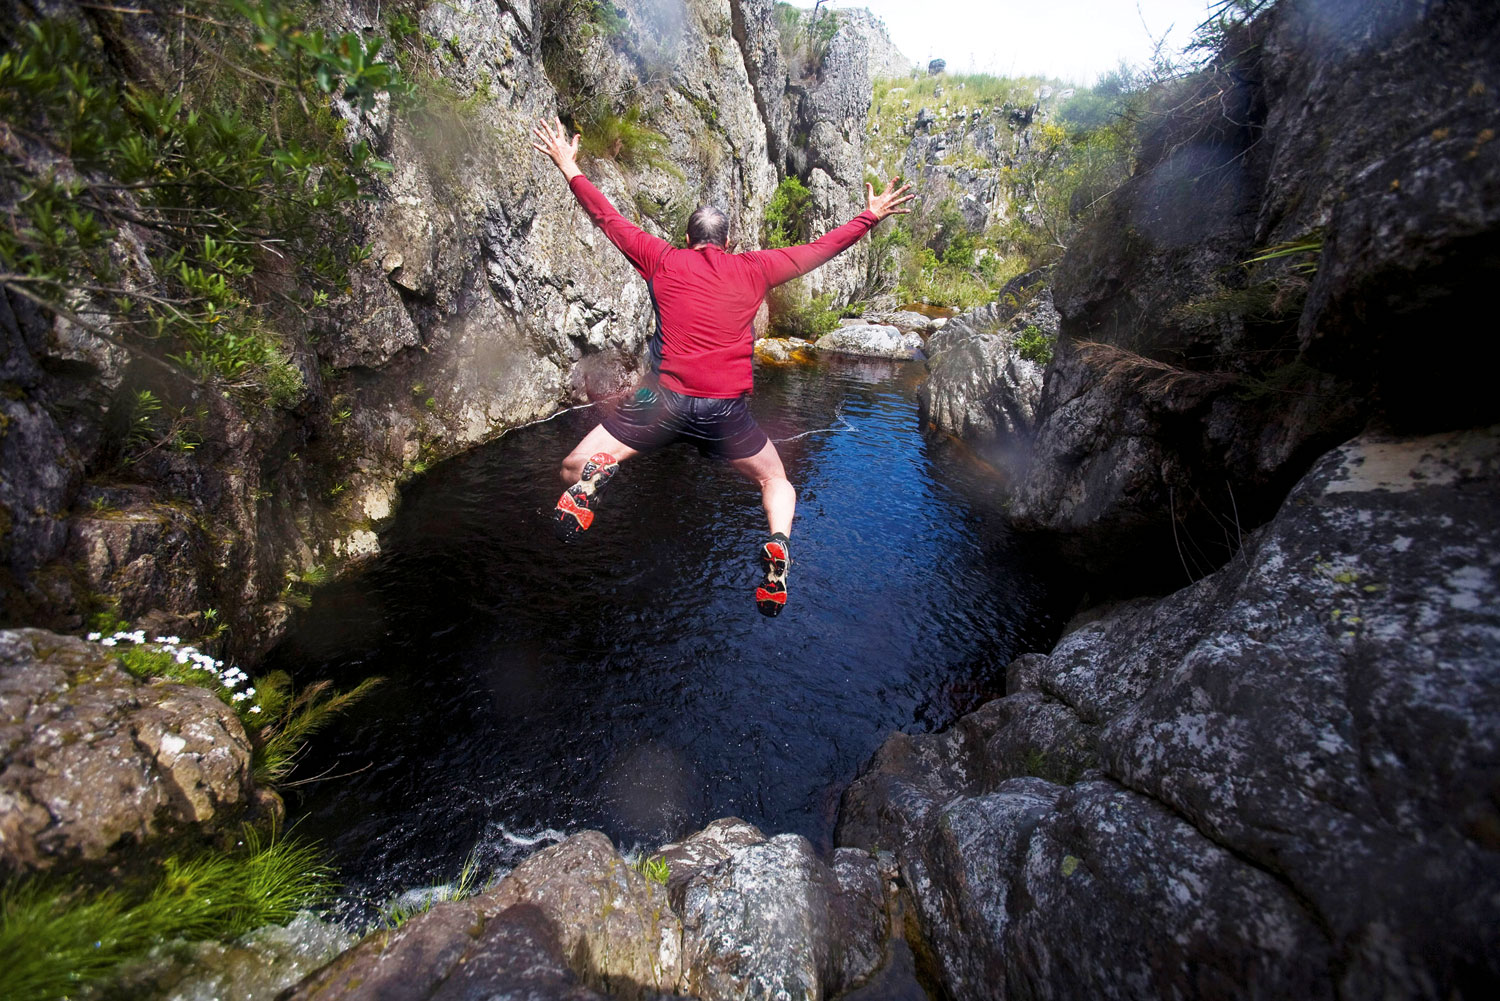 Todd Pitock tries his hand at 'kloofing' at Cape Town's Suicide Gorge.